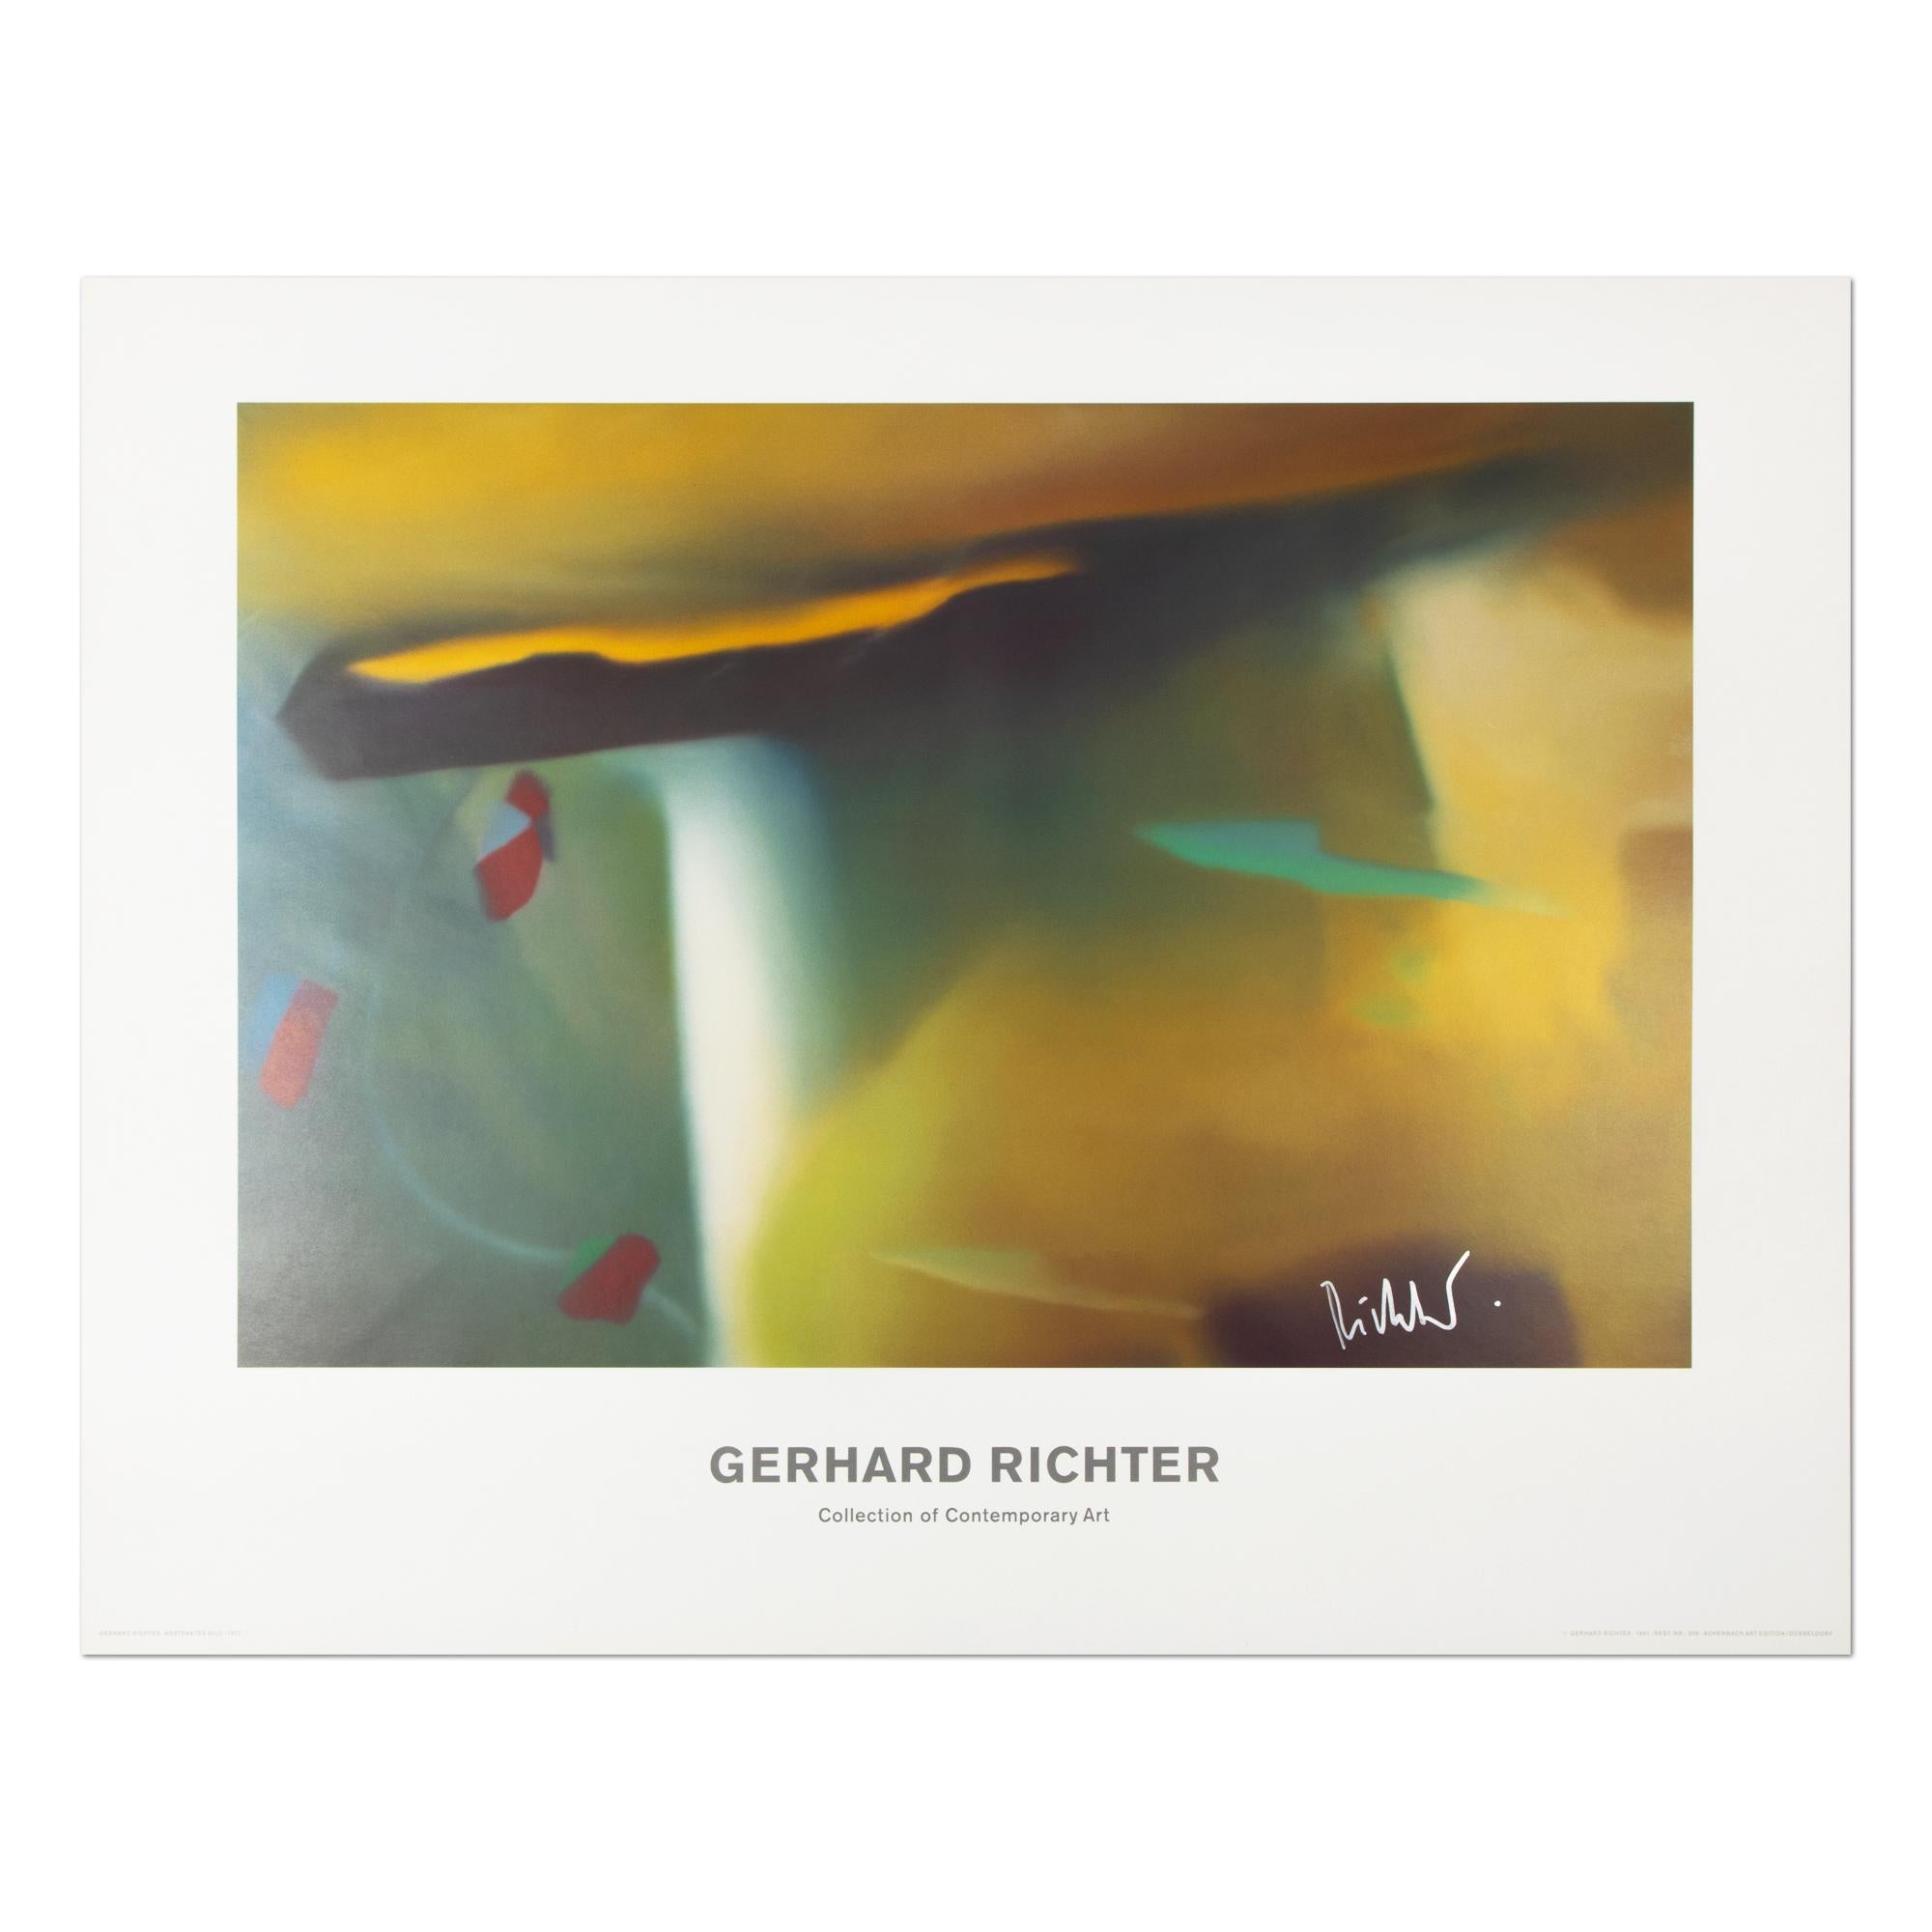 Gerhard Richter (born 1932 in Dresden)
Gerhard Richter: Collection of Contemporary Art, 1991
An image of the painting "Abstraktes Bild"
Dimensions: 49.3 x 74.3 cm (70.1 x 90.2 cm)
Medium: Offset lithograph printed in colors
Signature: Hand signed by